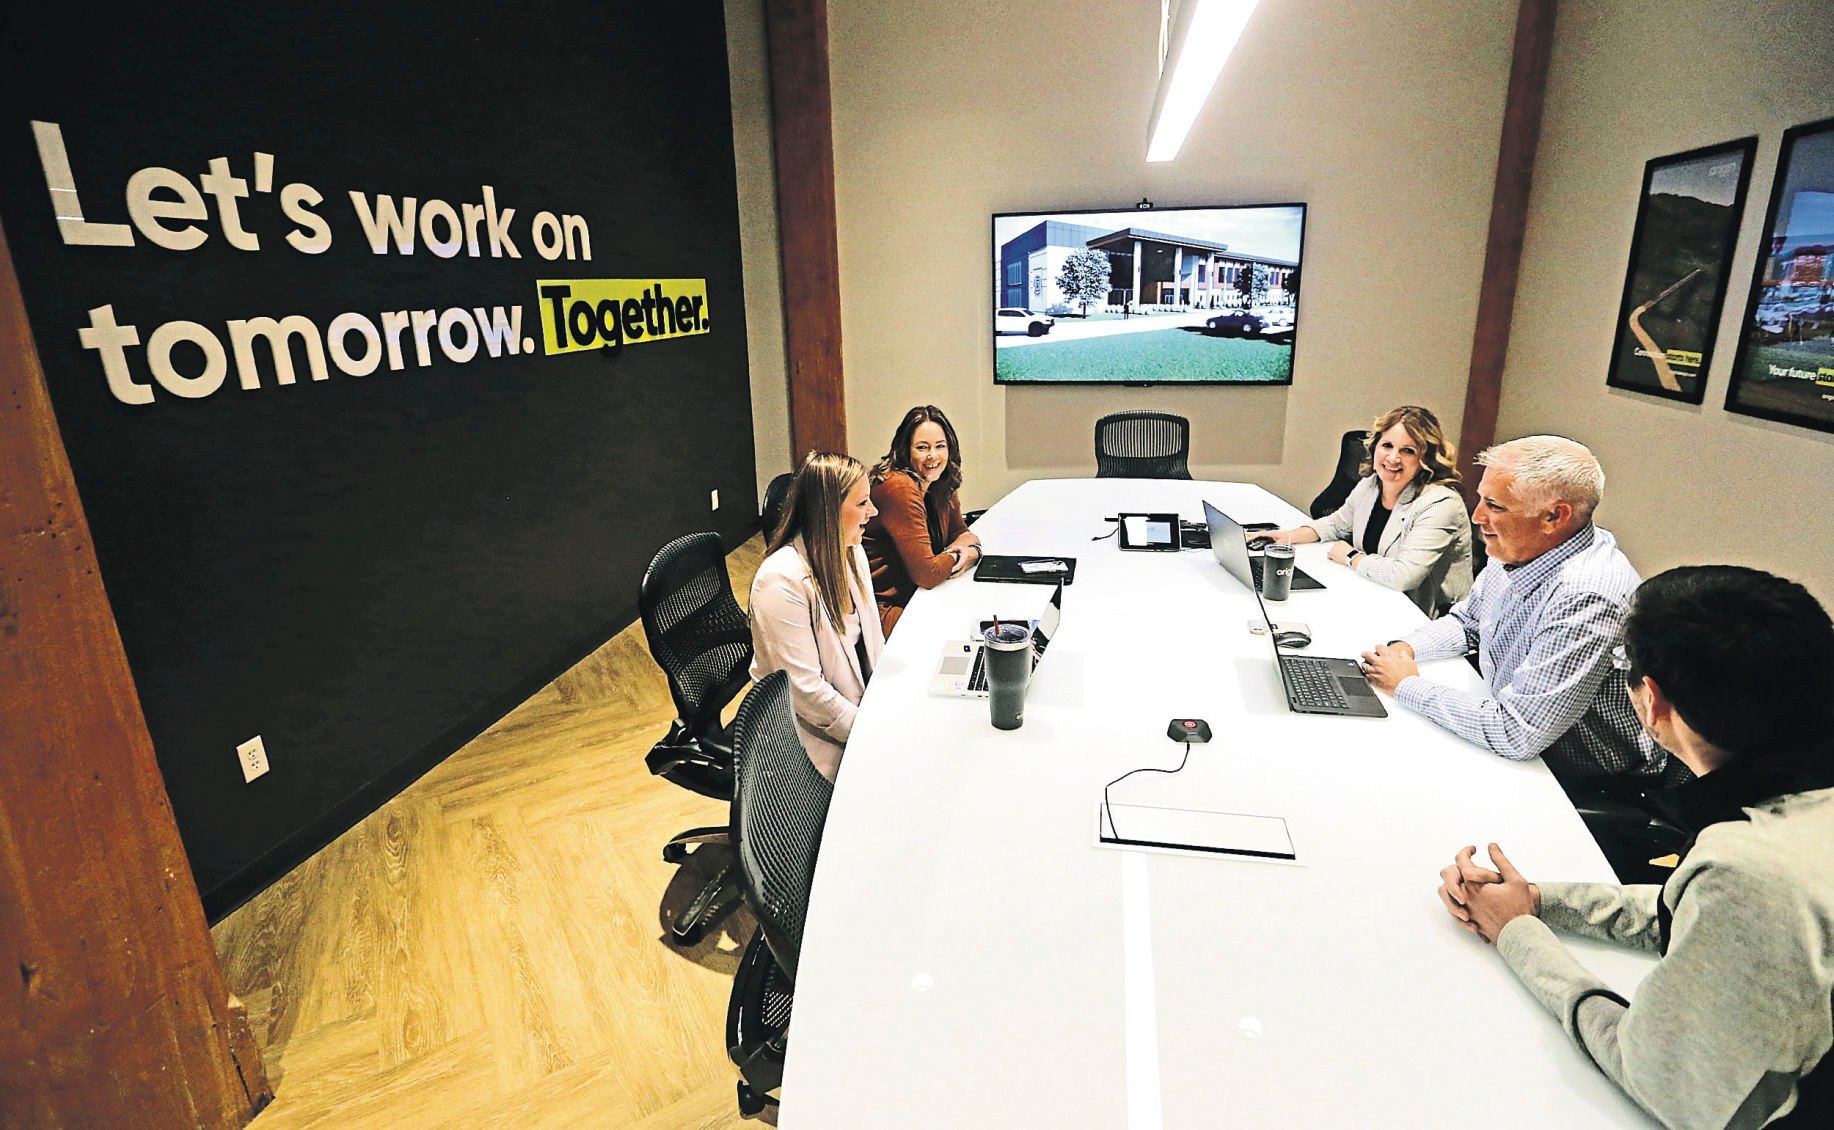 Codi Putnam (from left), Lauren Ray, Brenda Ritt, Pat Ready and Zach Thielen discuss topics during a meeting at Origin Design in Dubuque on Tuesday, May 24, 2022.    PHOTO CREDIT: JESSICA REILLY